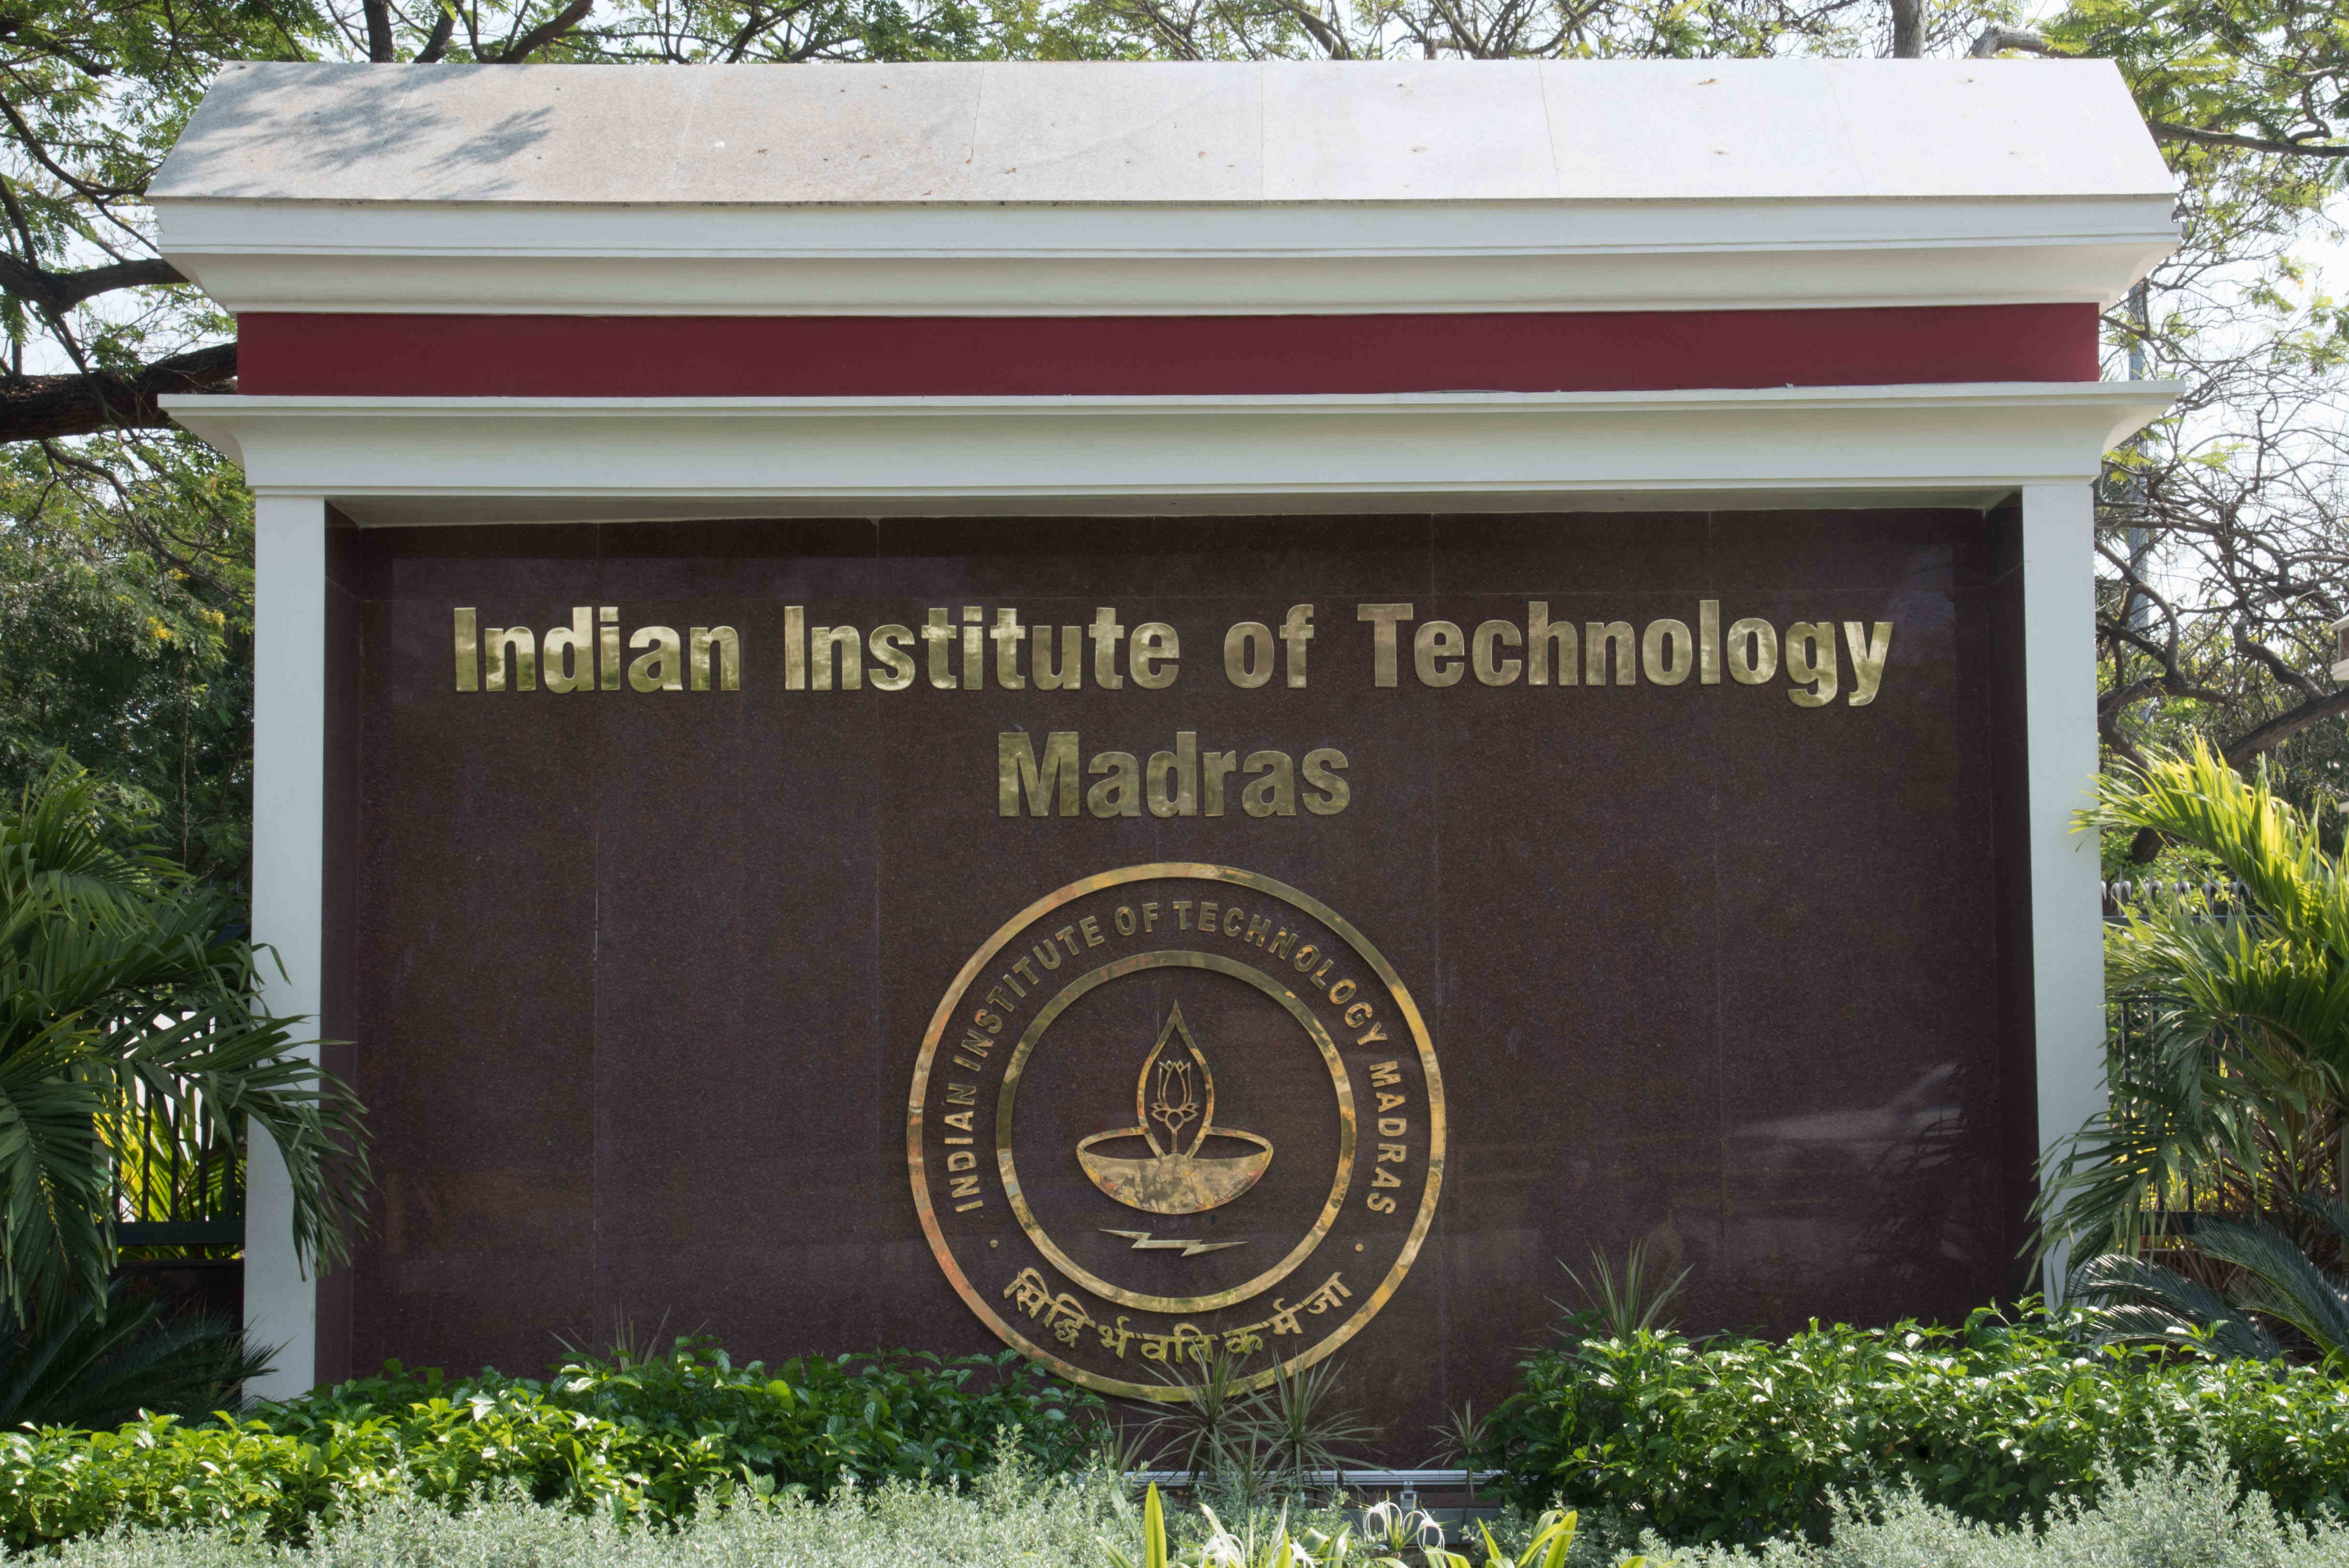 ‘IIT Madras Sports Excellence Admission will enable fusion of technology with sports’